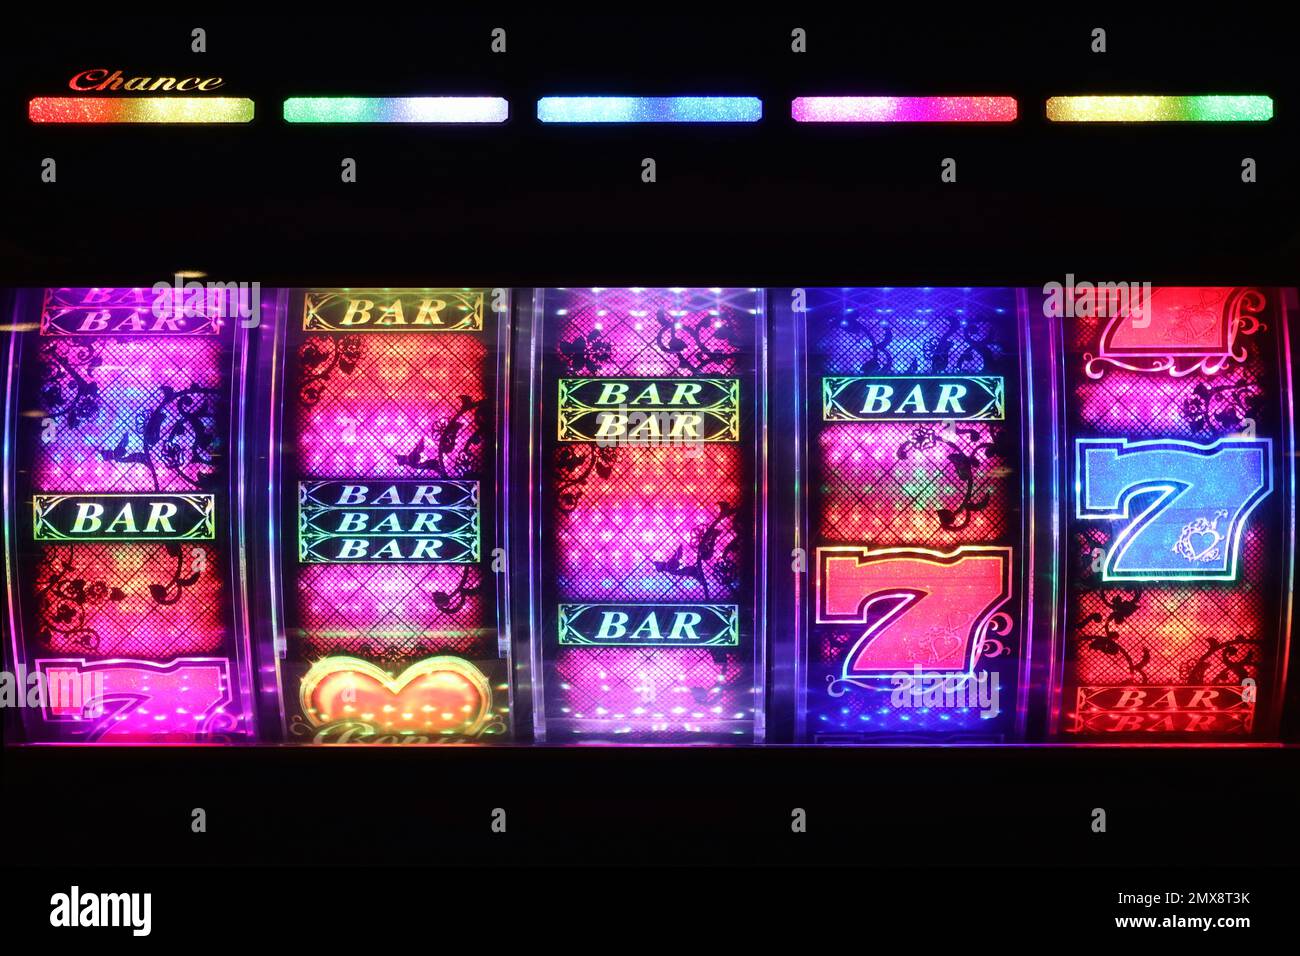 Illuminated slot machine drums with colourful graphics and flashing light sequences attract punters to pit their wits in amusement arcades. Stock Photo